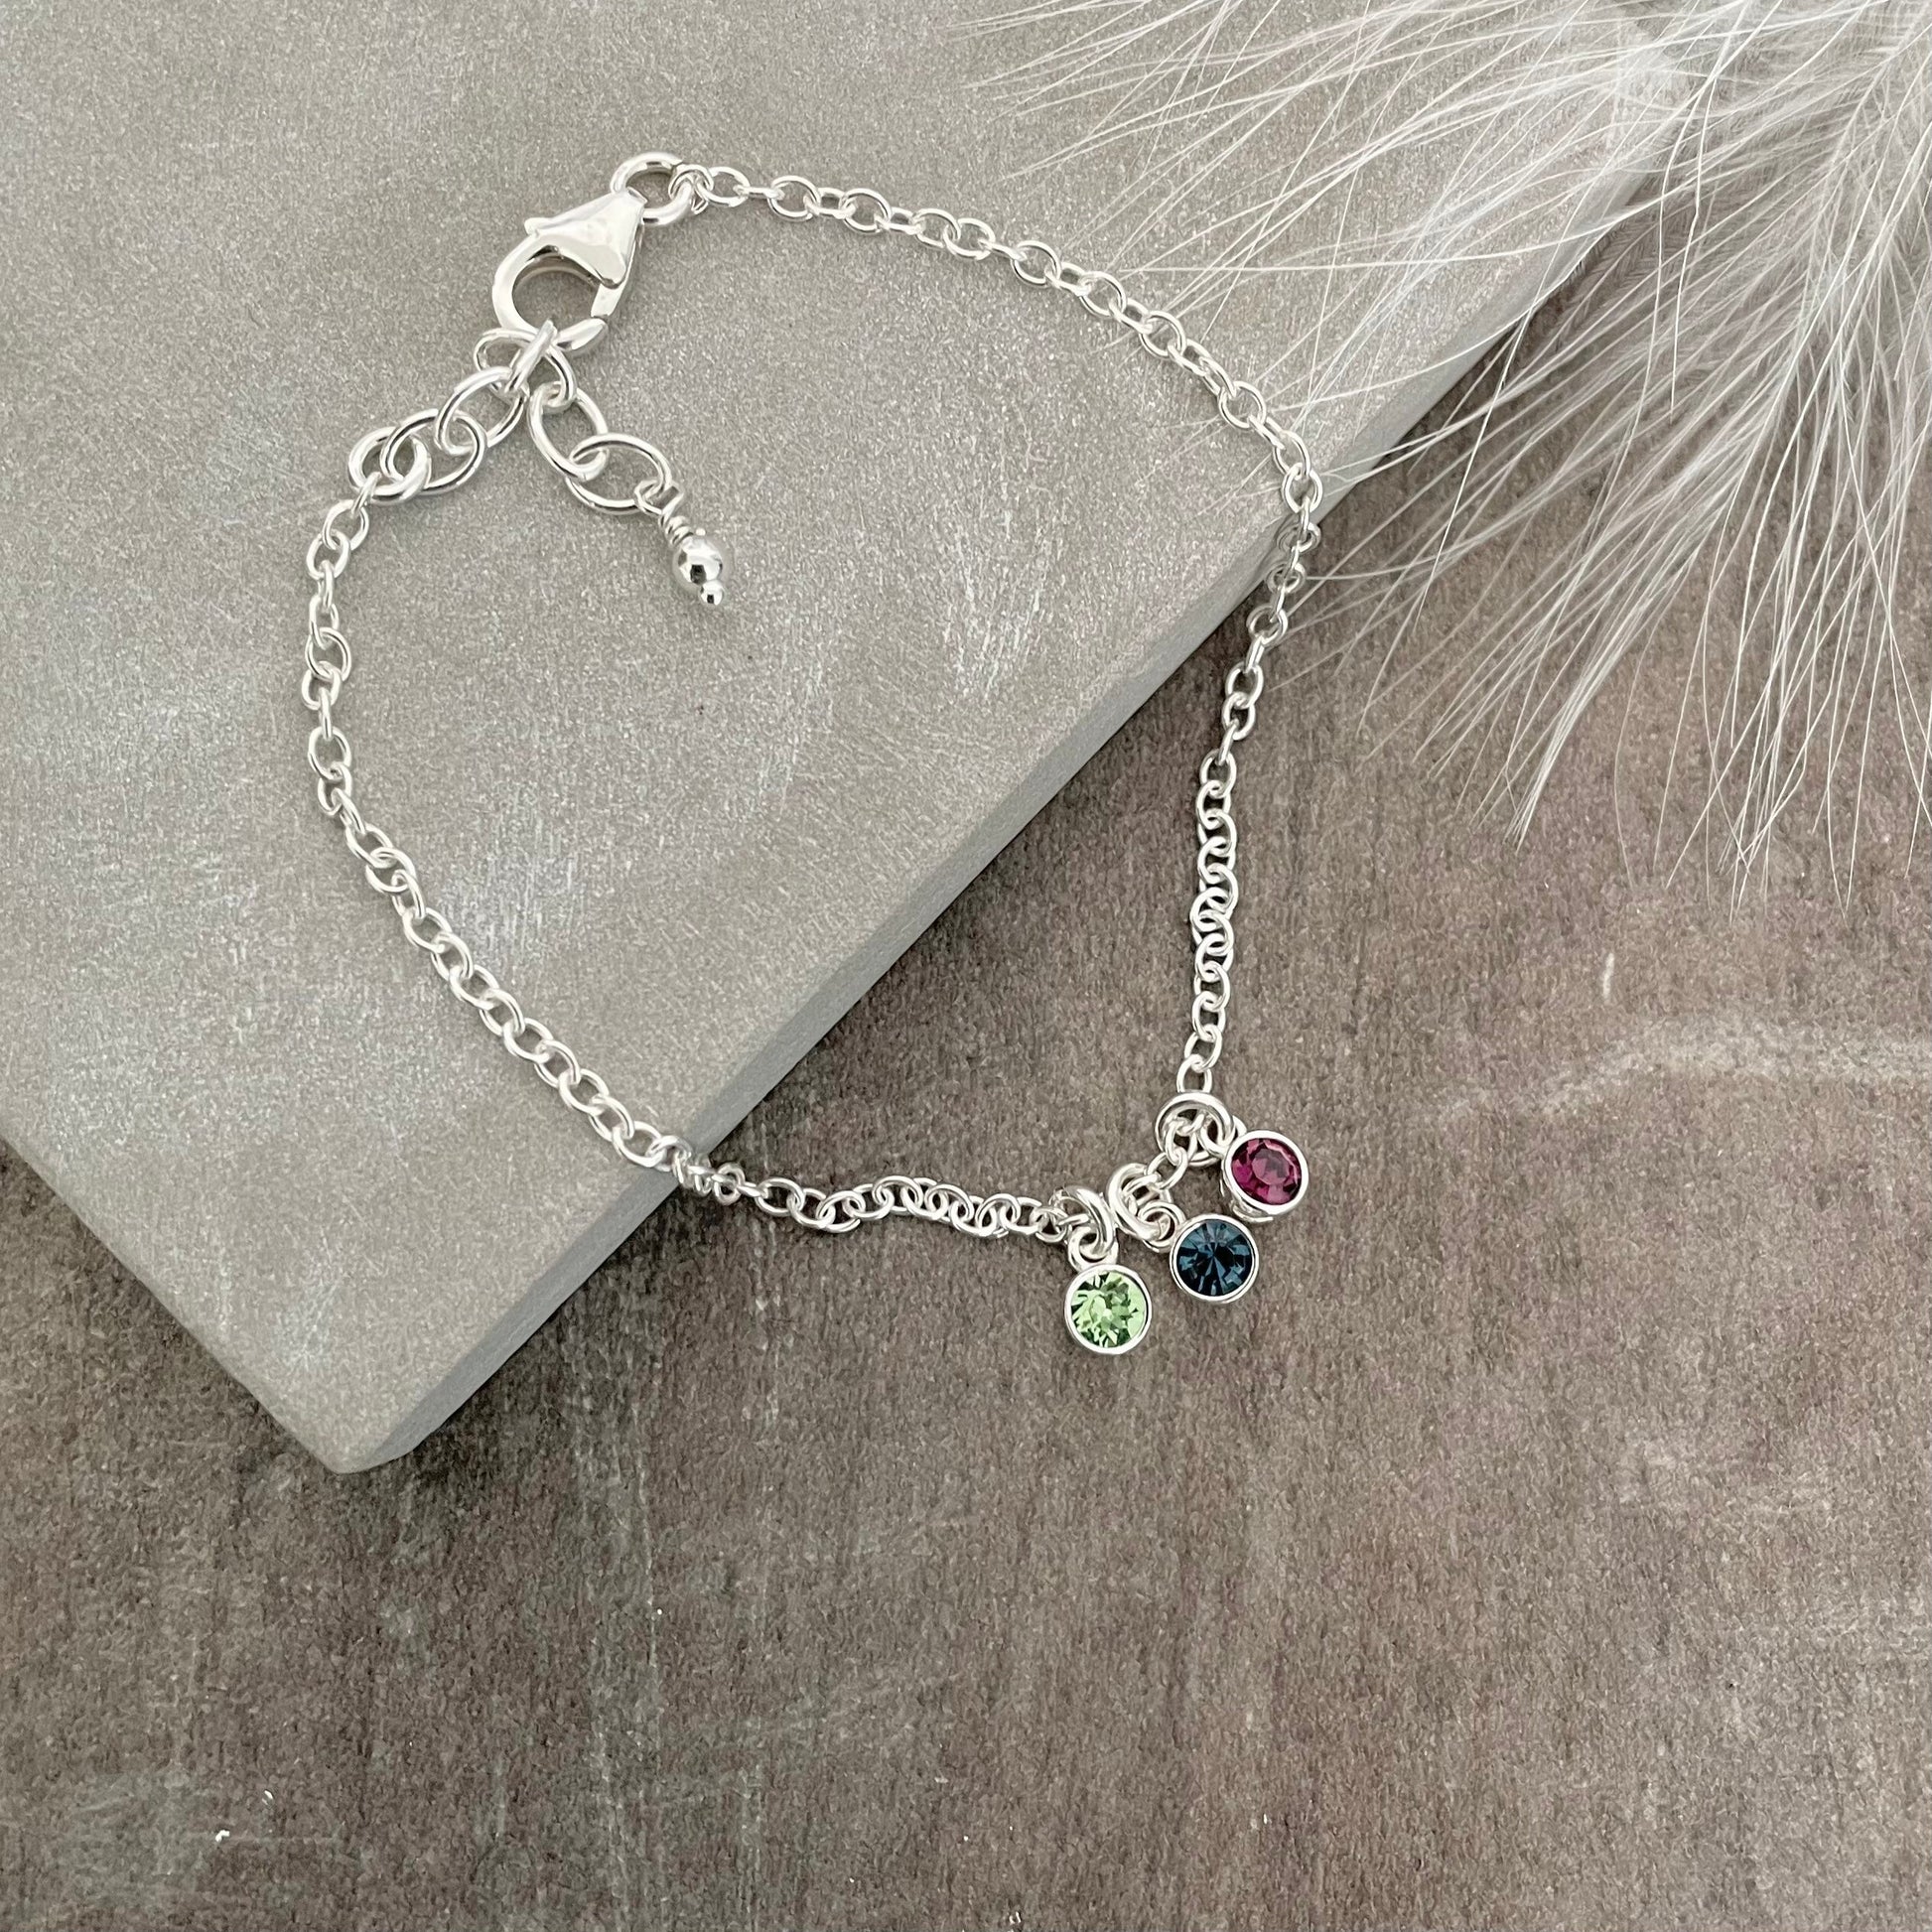 Crystal Family Birthstone Bracelet, Sterling Silver chain Christmas Gift for Mum, Family Birthstone Jewellery